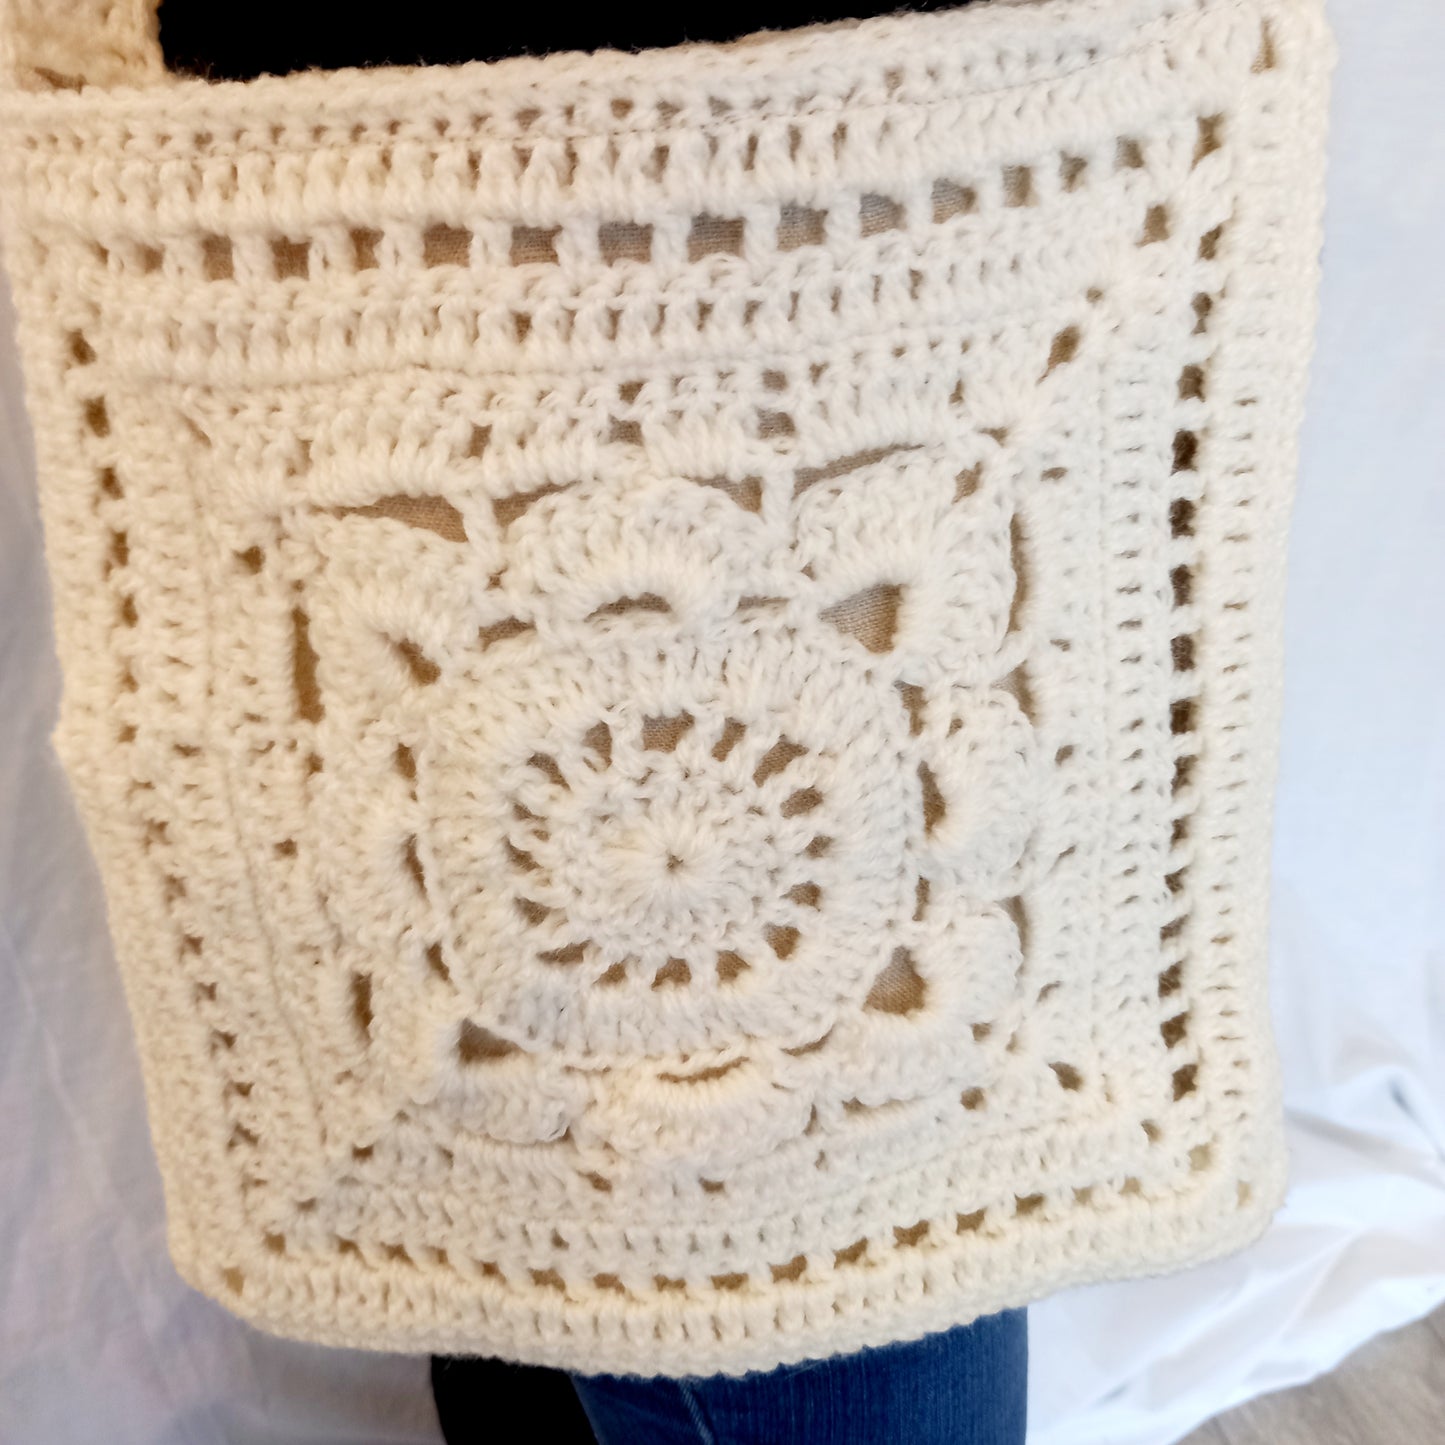 "Hand made crochet bag with flower details"